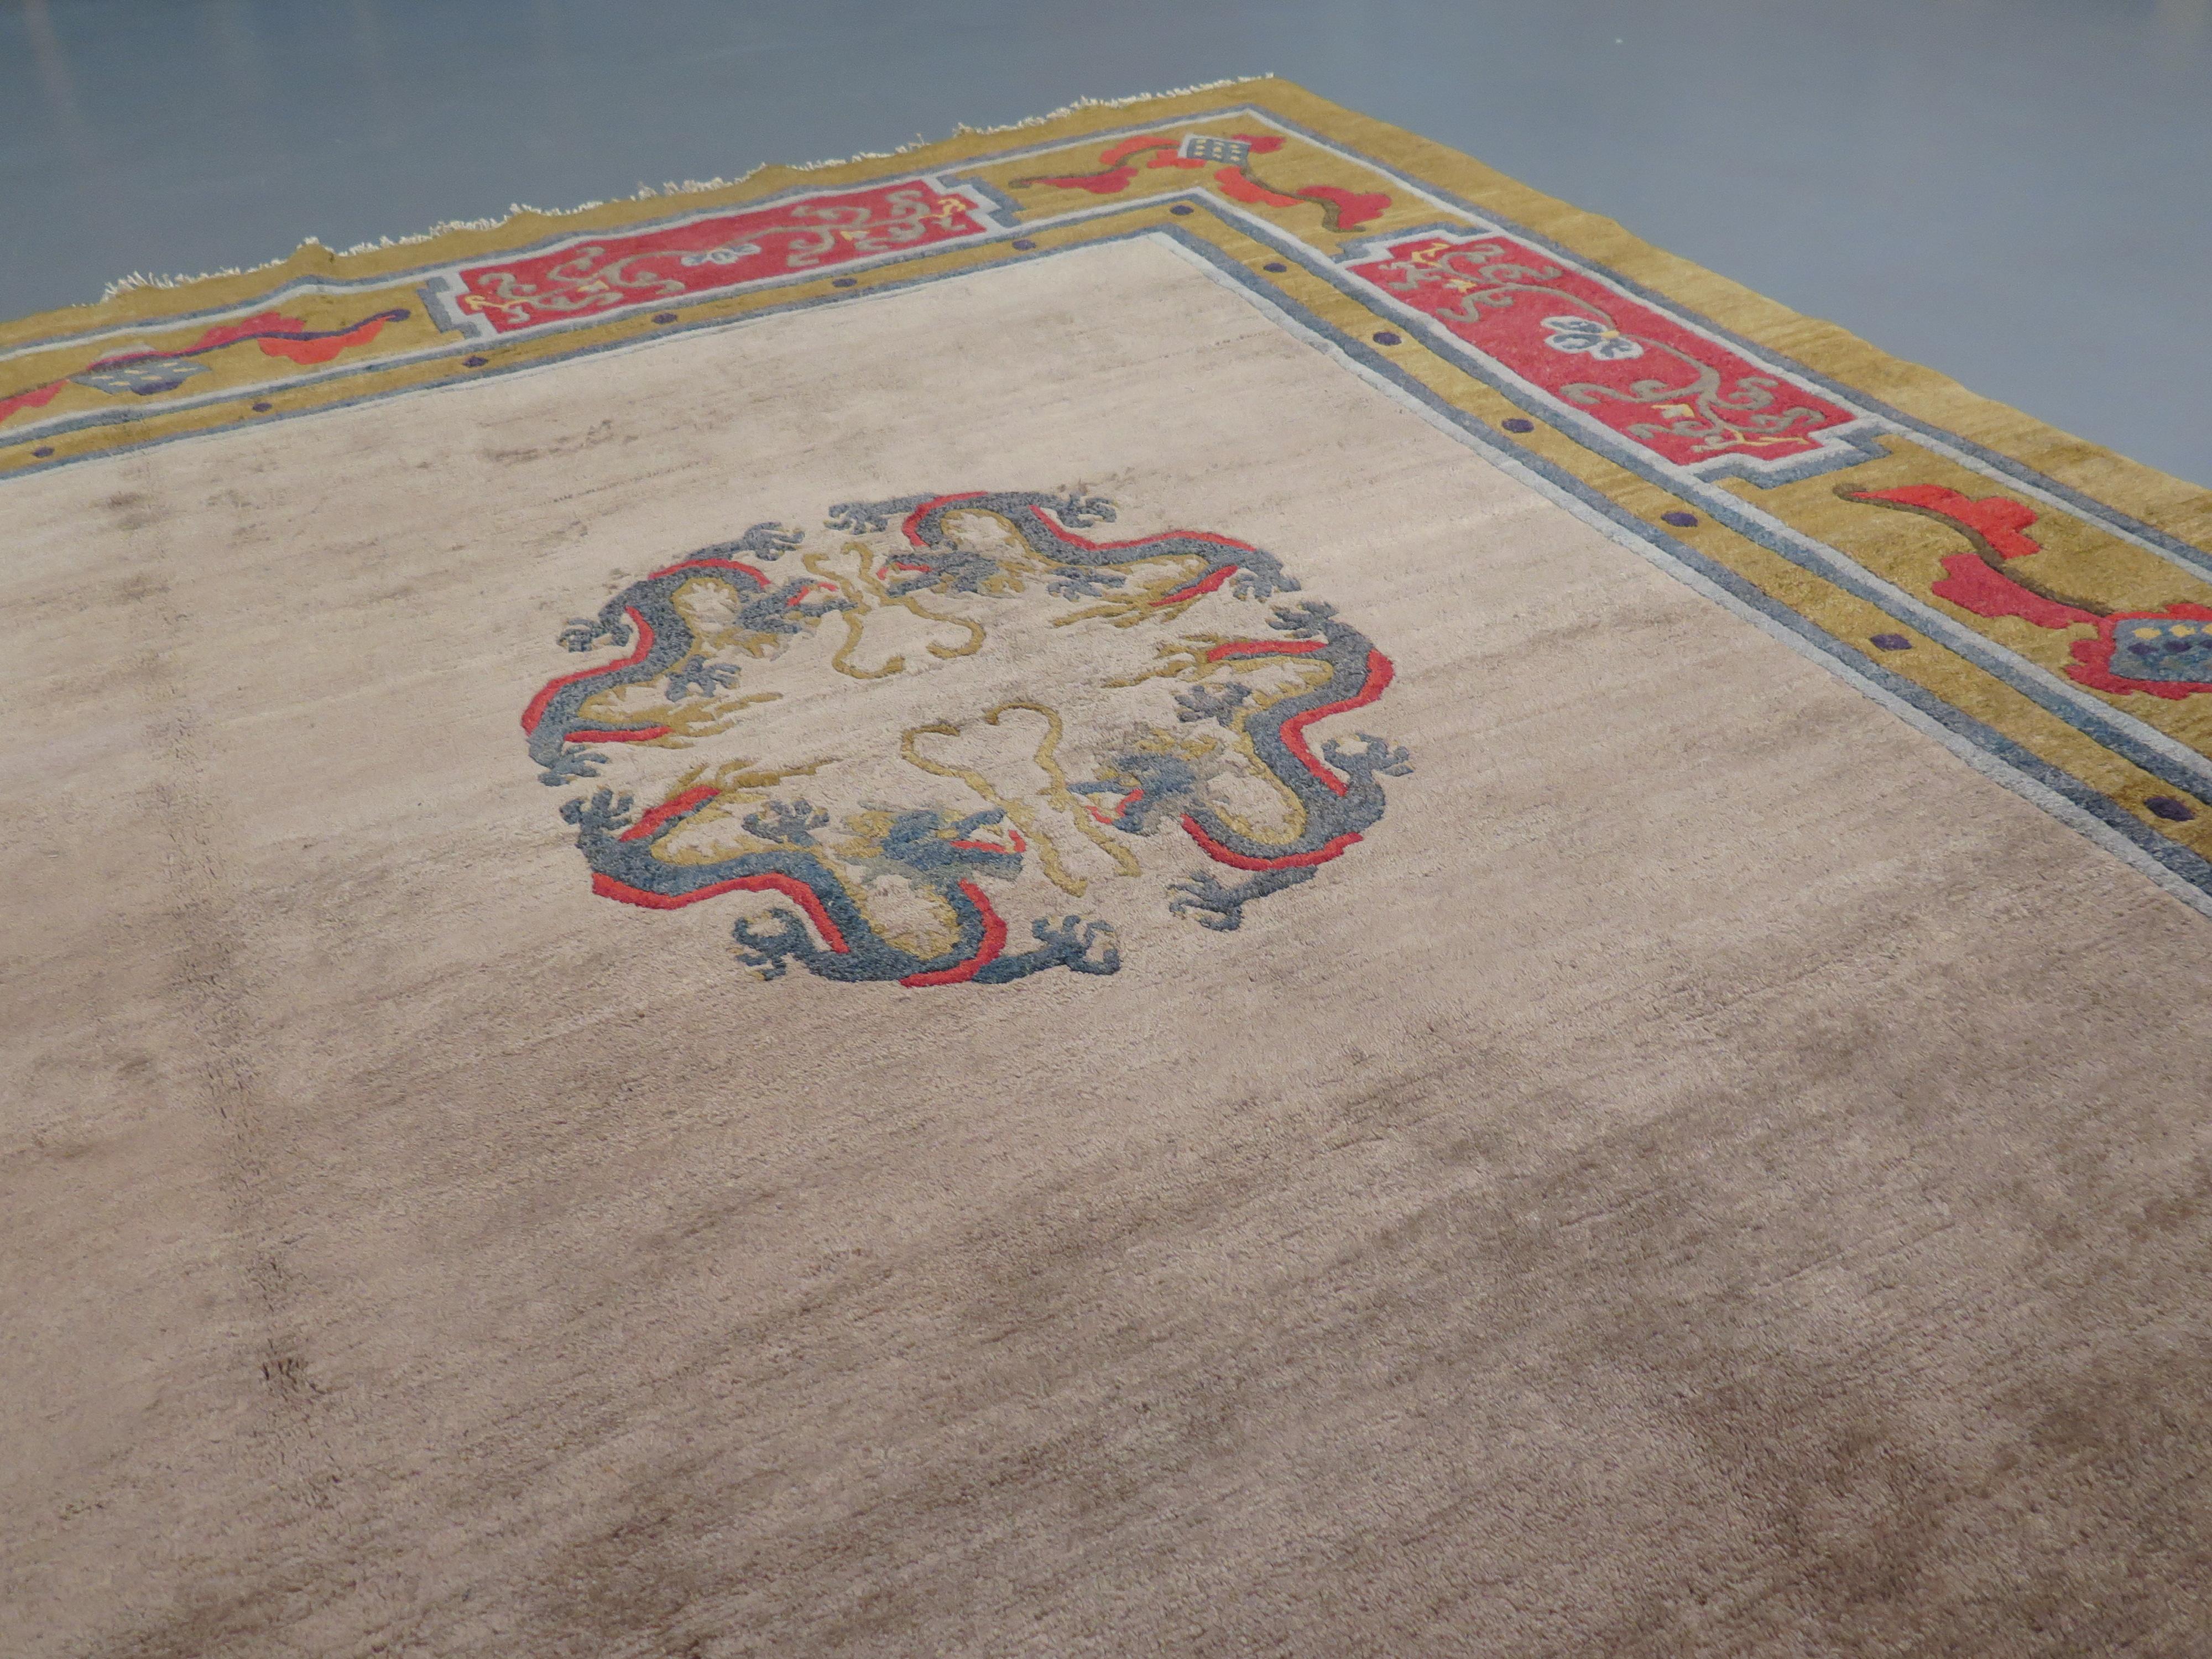 Though very few antique examples have survived, the tradition of Mongolian carpet weaving goes back many centuries, inspired in part by the designs of Chinese textiles, borrowing certain characteristic designs, including images of tigers, Buddhist